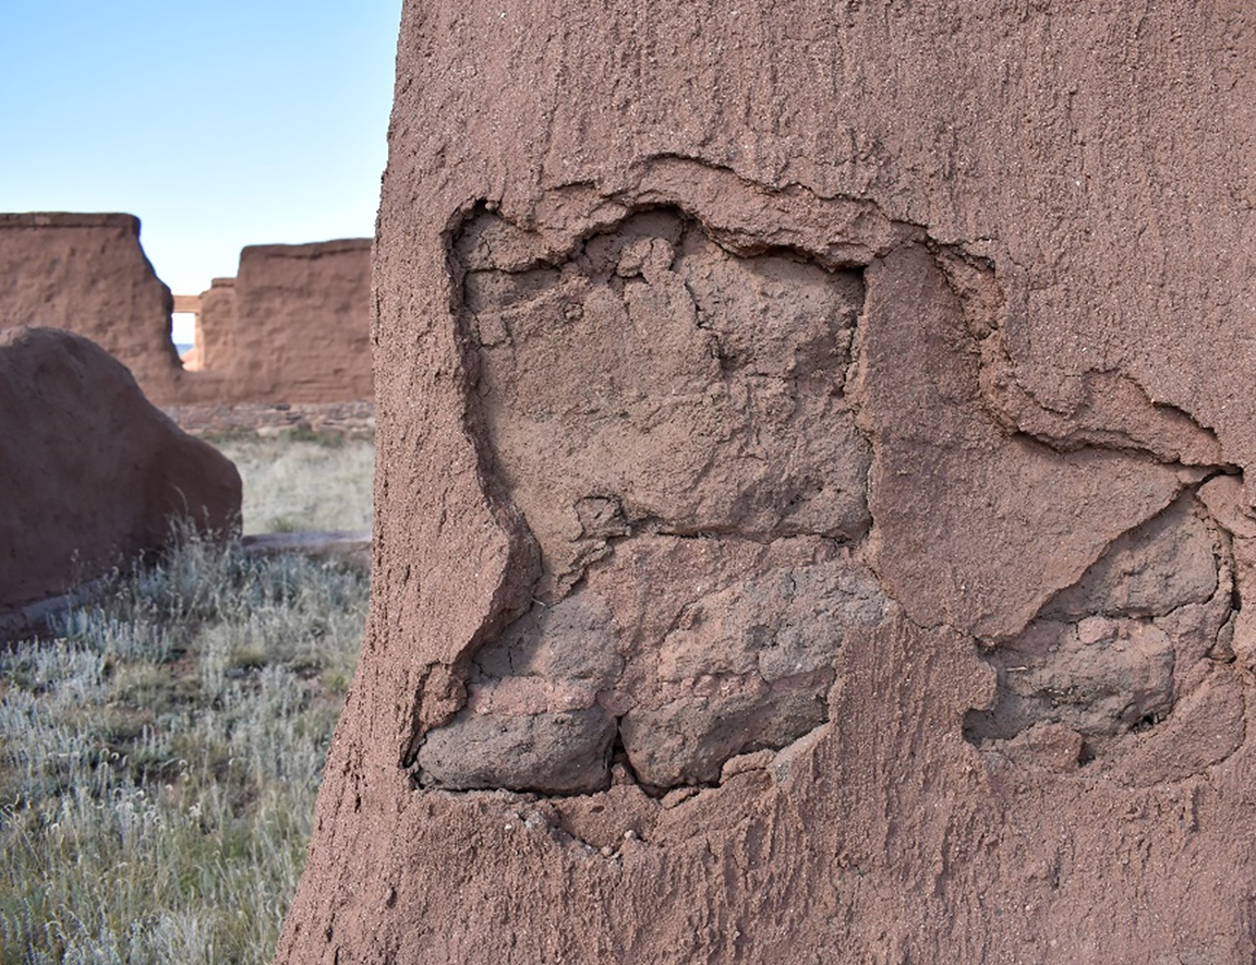 Spalled shelter coat leaving the original adobe exposed to the elements at Fort Union National Monument in September 2021 (Photo